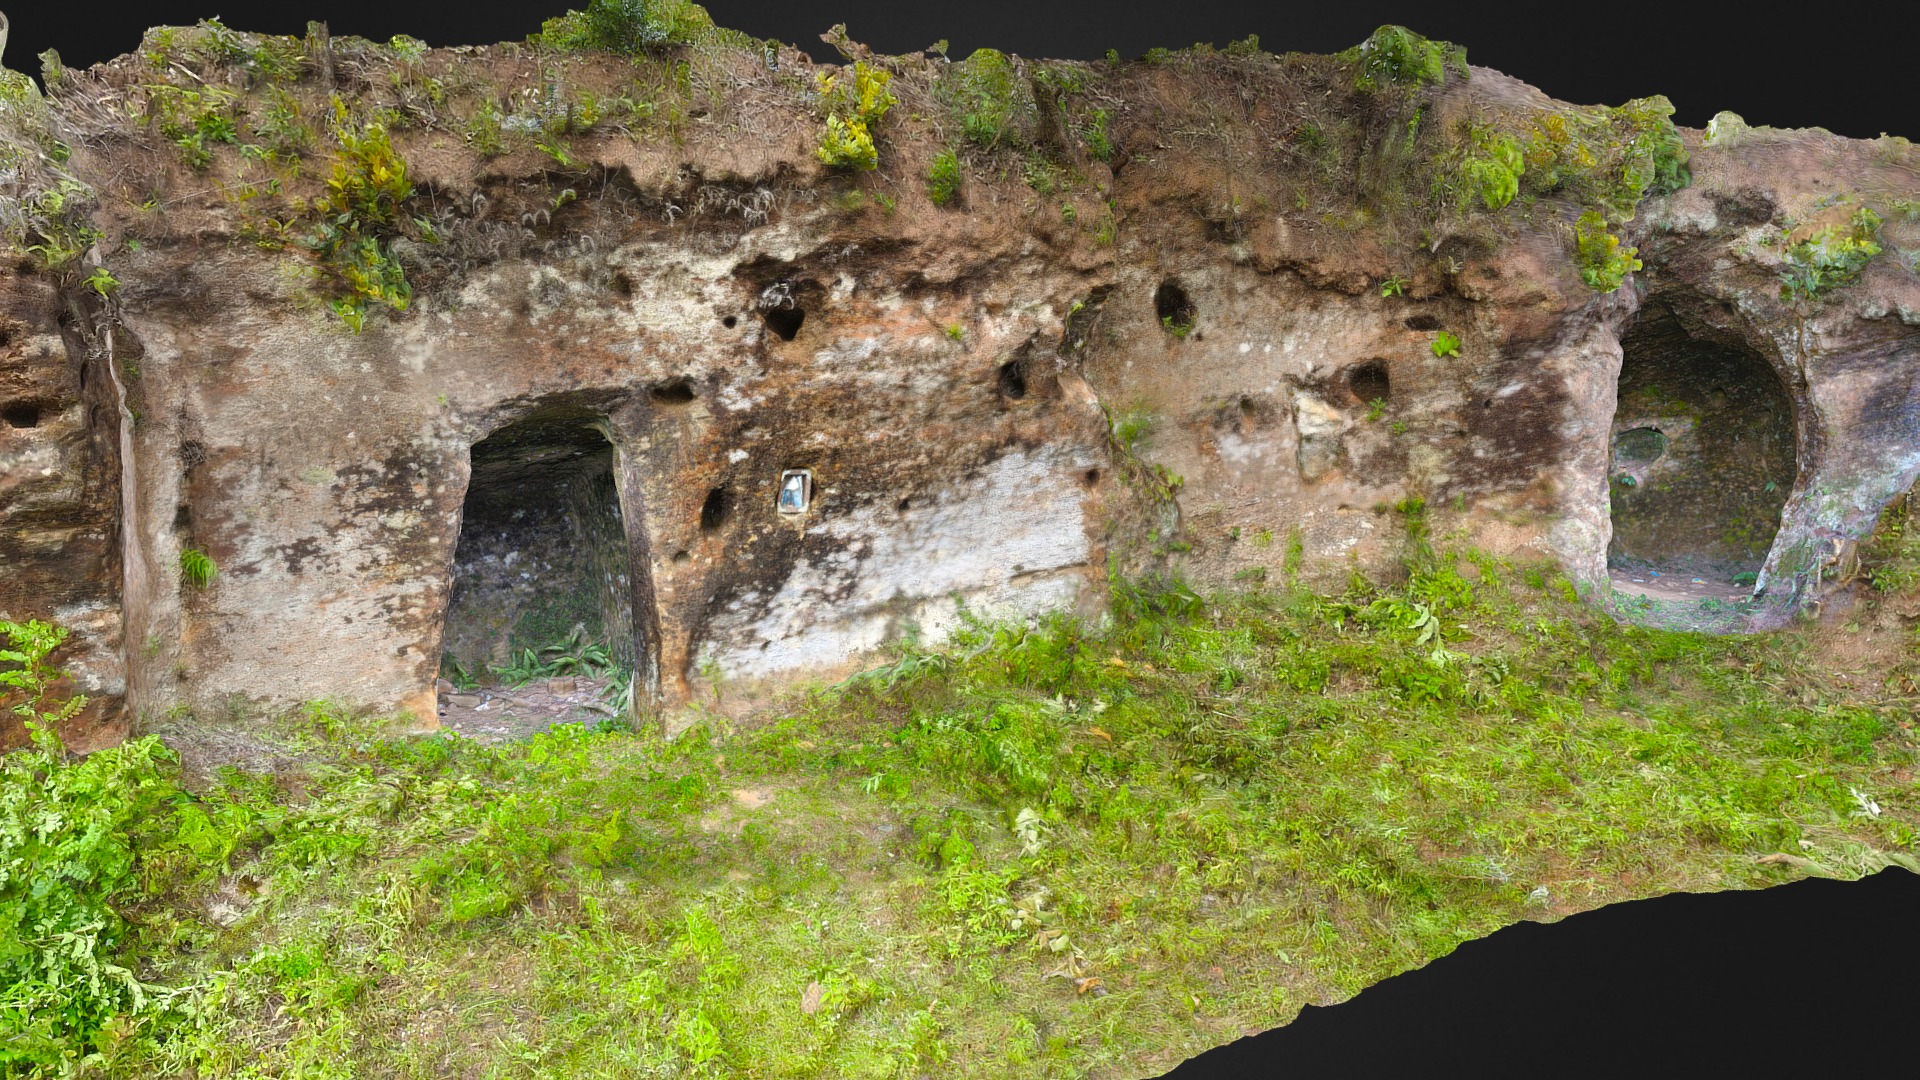 3D model Minas de ouro do século XVIII – Ouro Preto – MG - This is a 3D model of the Minas de ouro do século XVIII - Ouro Preto - MG. The 3D model is about a stone building with a hole in it.